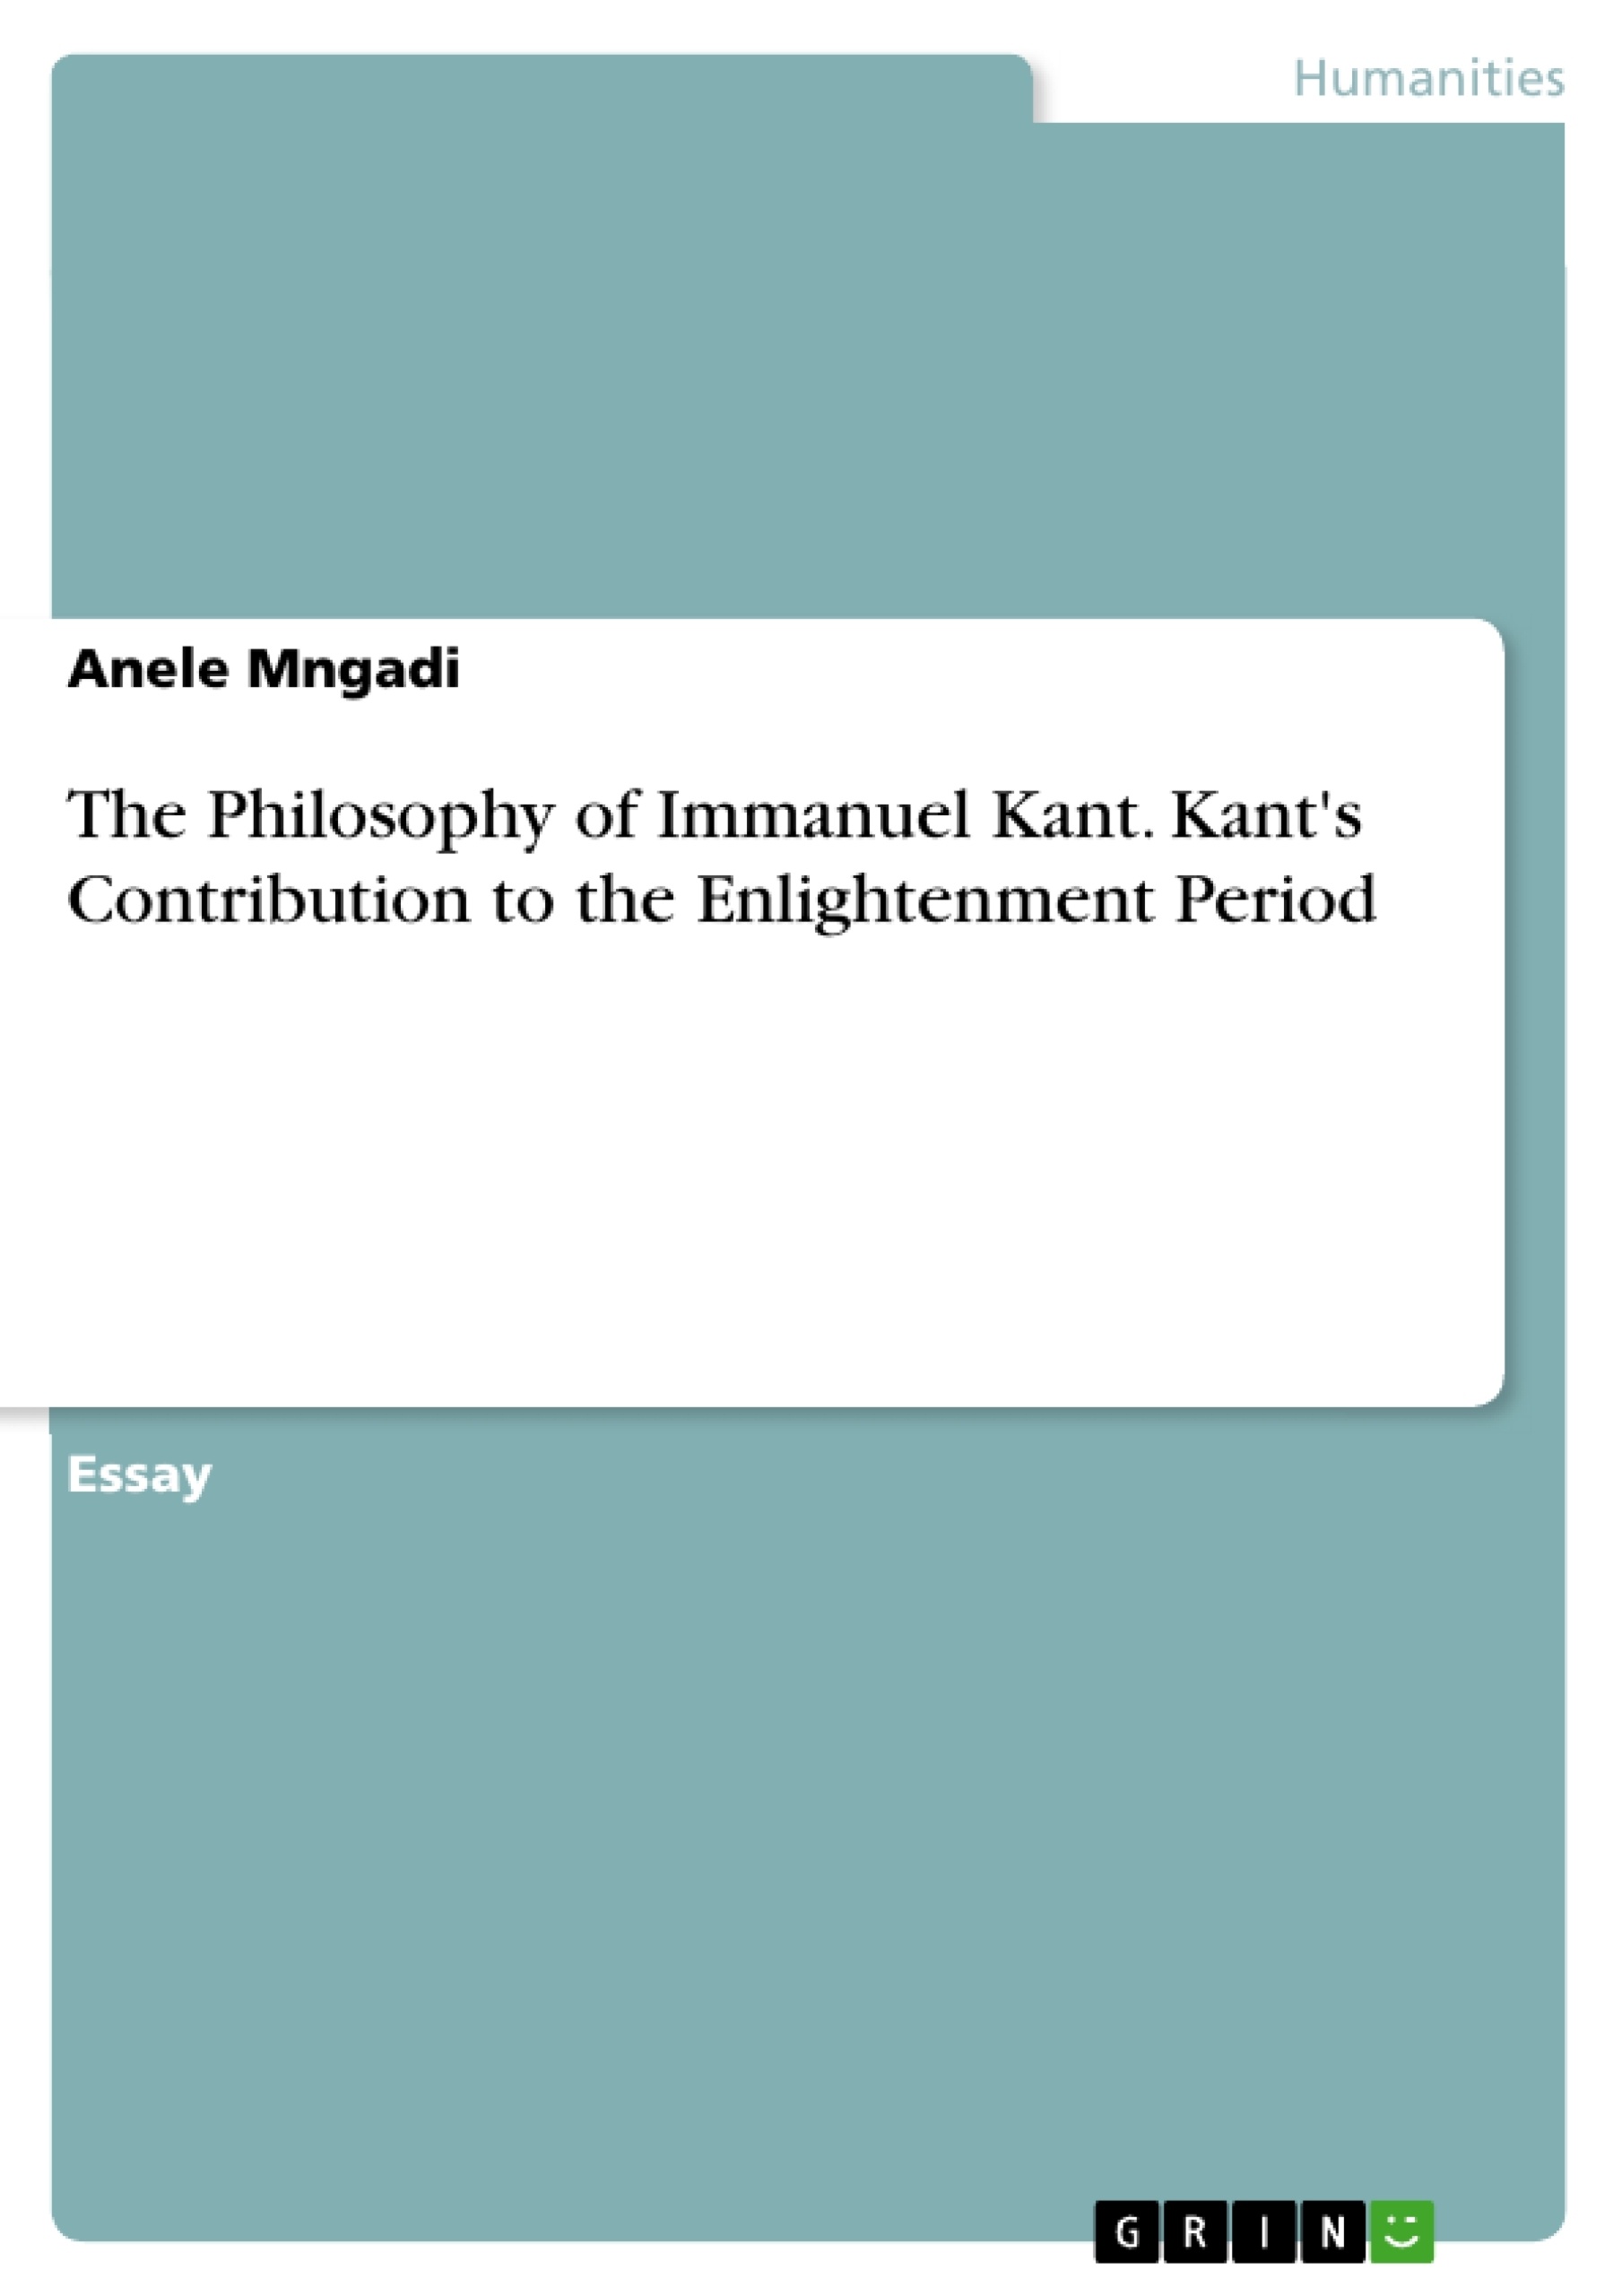 Title: The Philosophy of Immanuel Kant. Kant's Contribution to the Enlightenment Period